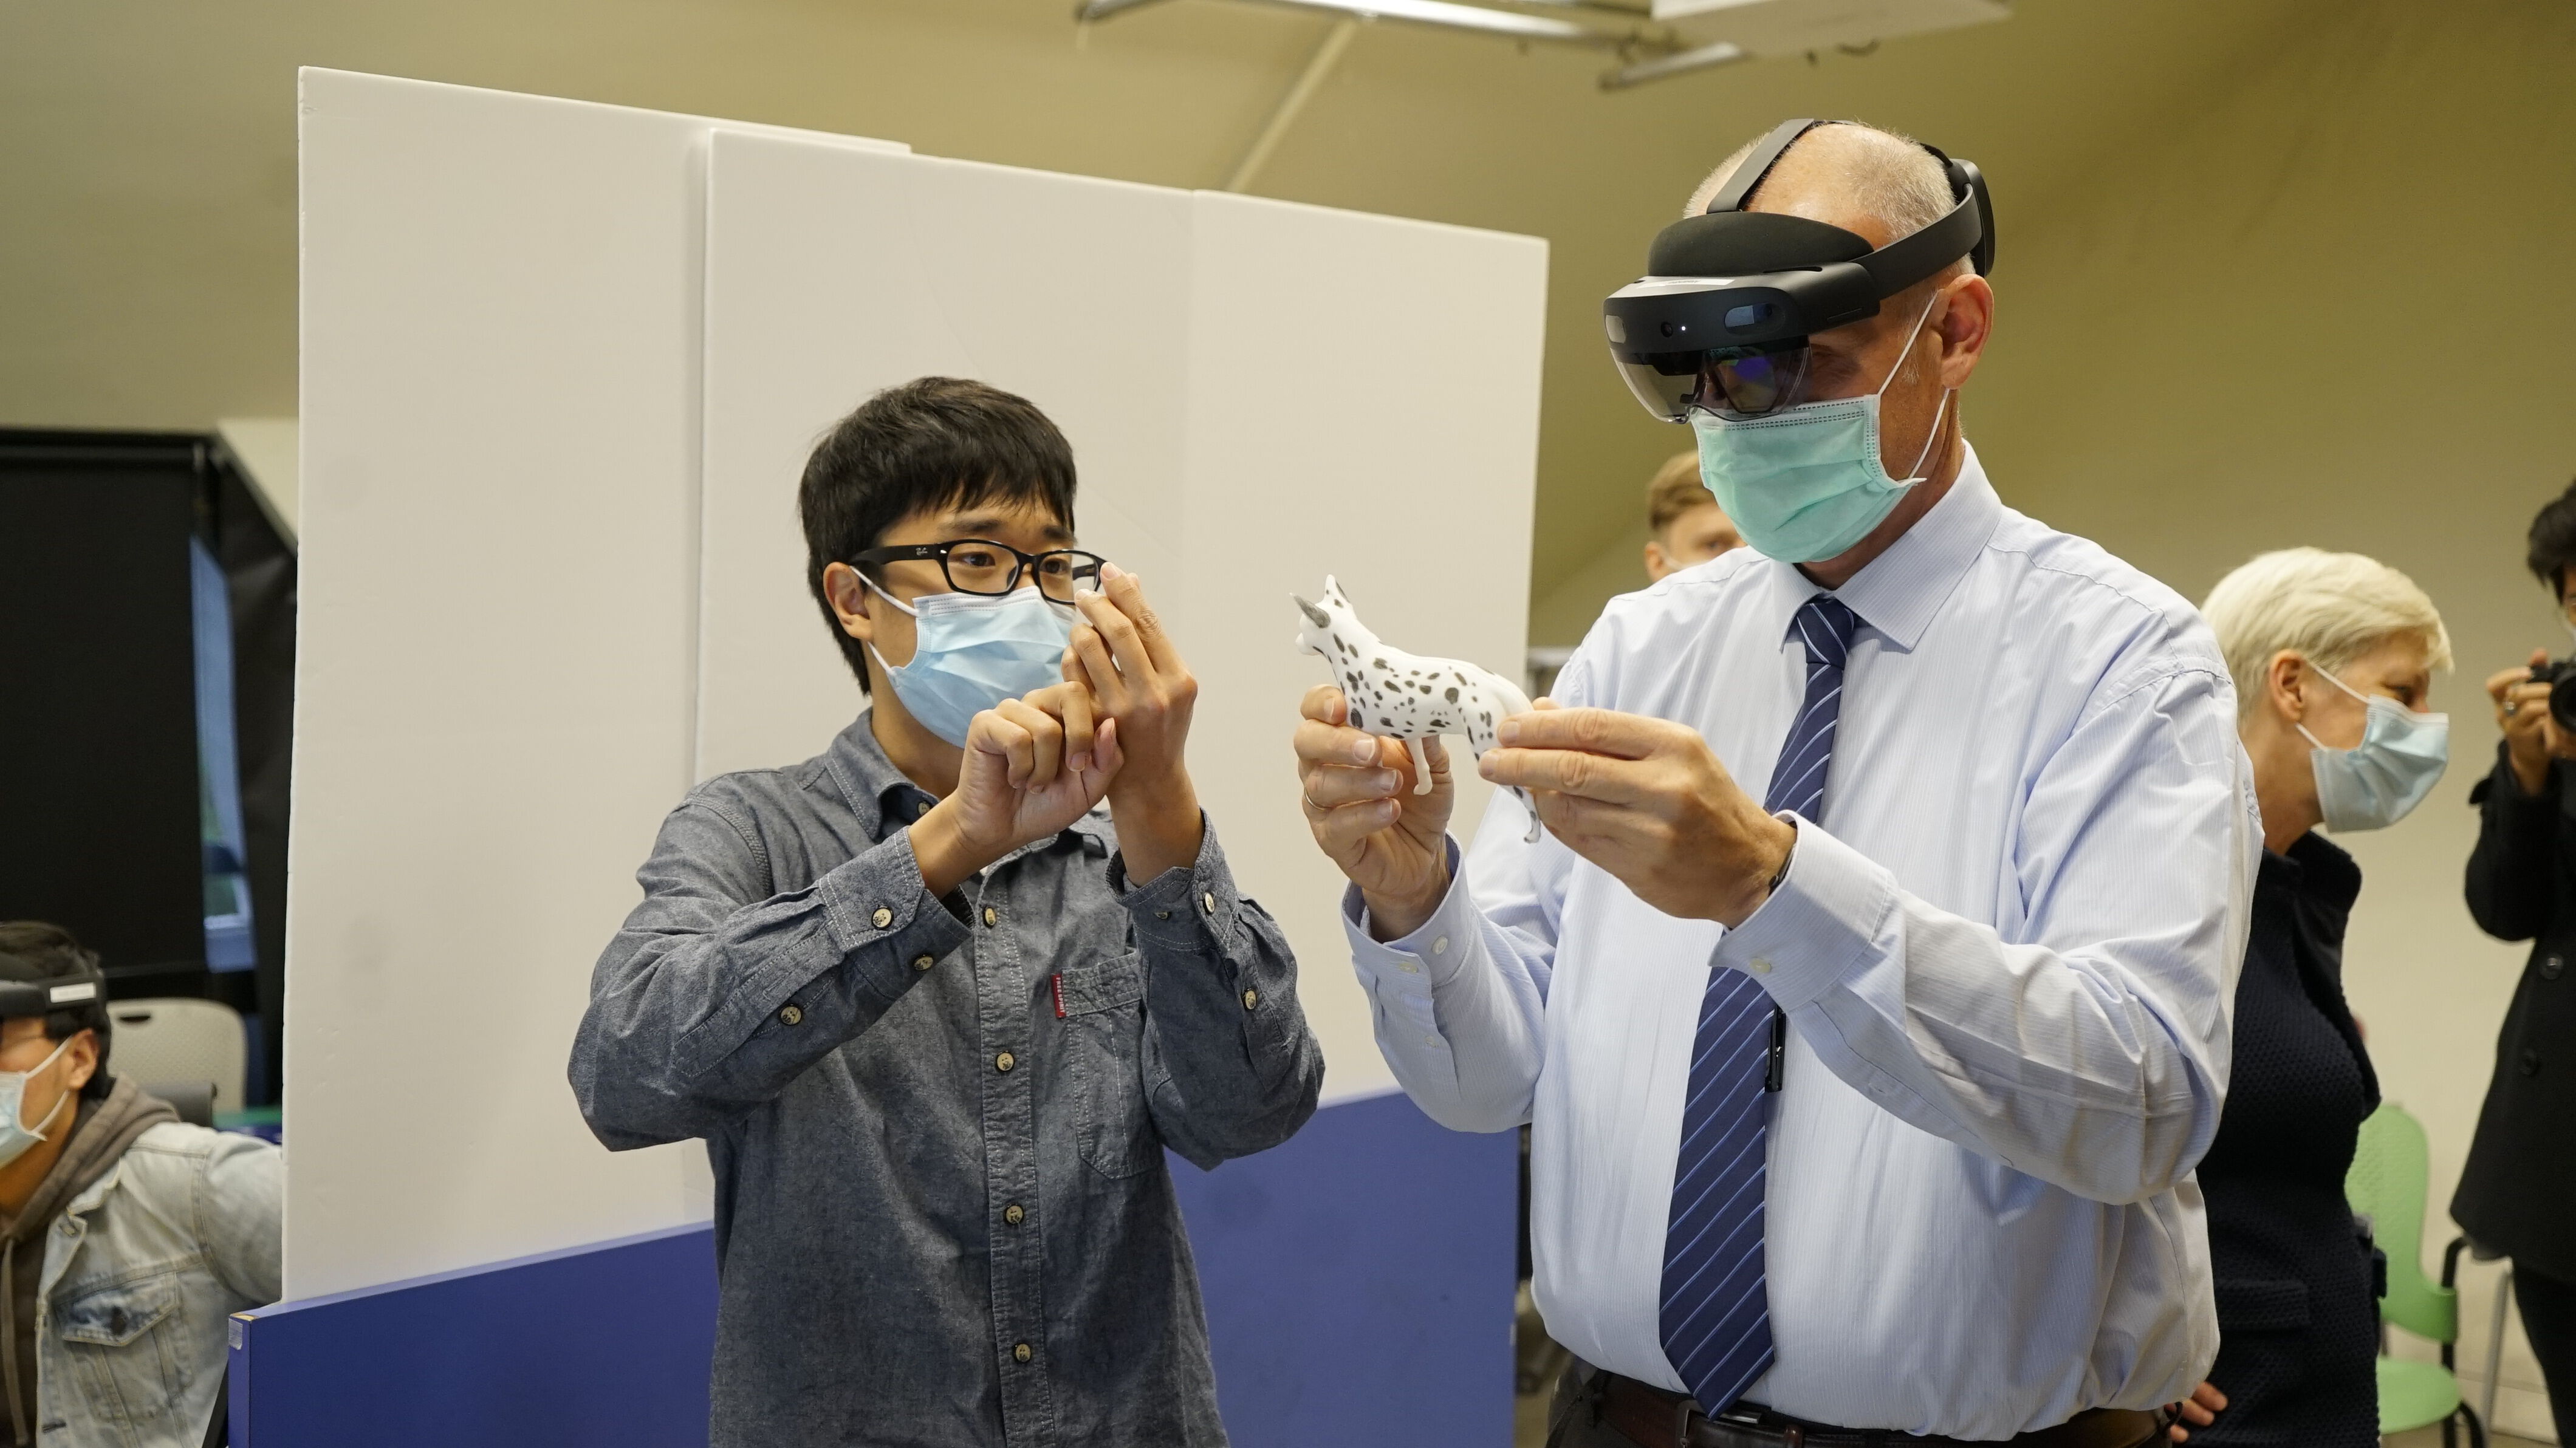  Qiaochu Wang shows his demo Veterinary Healthcare Training with AR to Prof. Nikolaus Osterrieder, the Dean of Jockey Club College of Veterinary Medicine and Life Sciences (JCC).